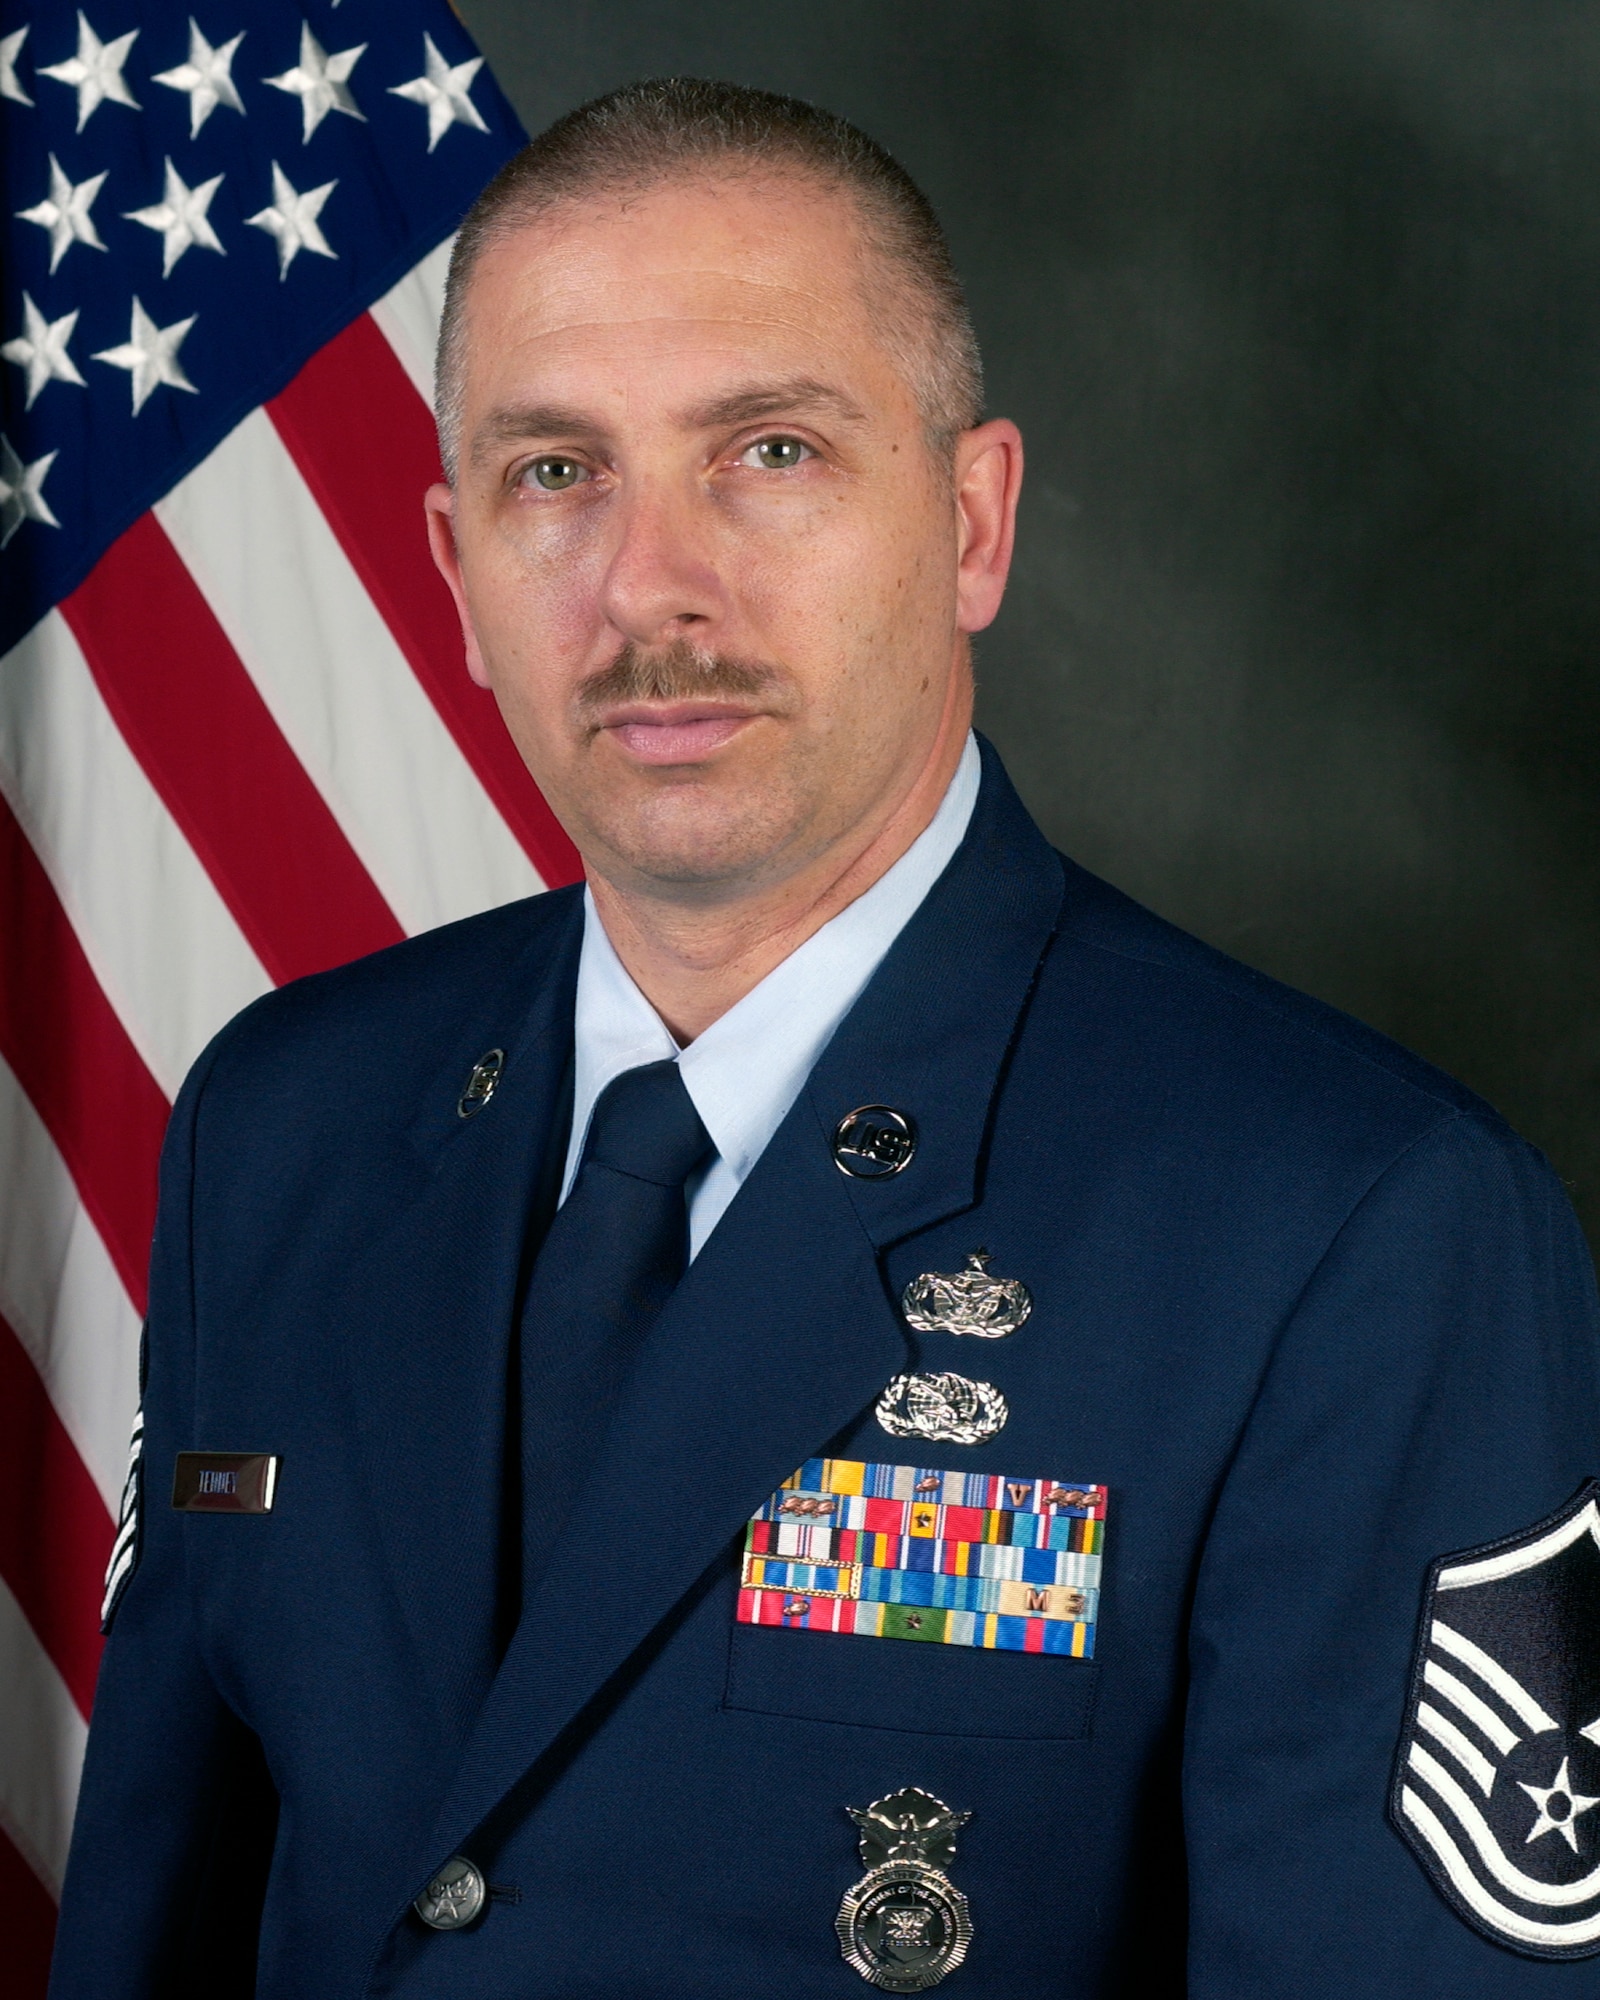 Master Sgt. James Tenney excels as a squad leader
in the Kentucky Air Guard’s 123rd Security Forces Squadron.